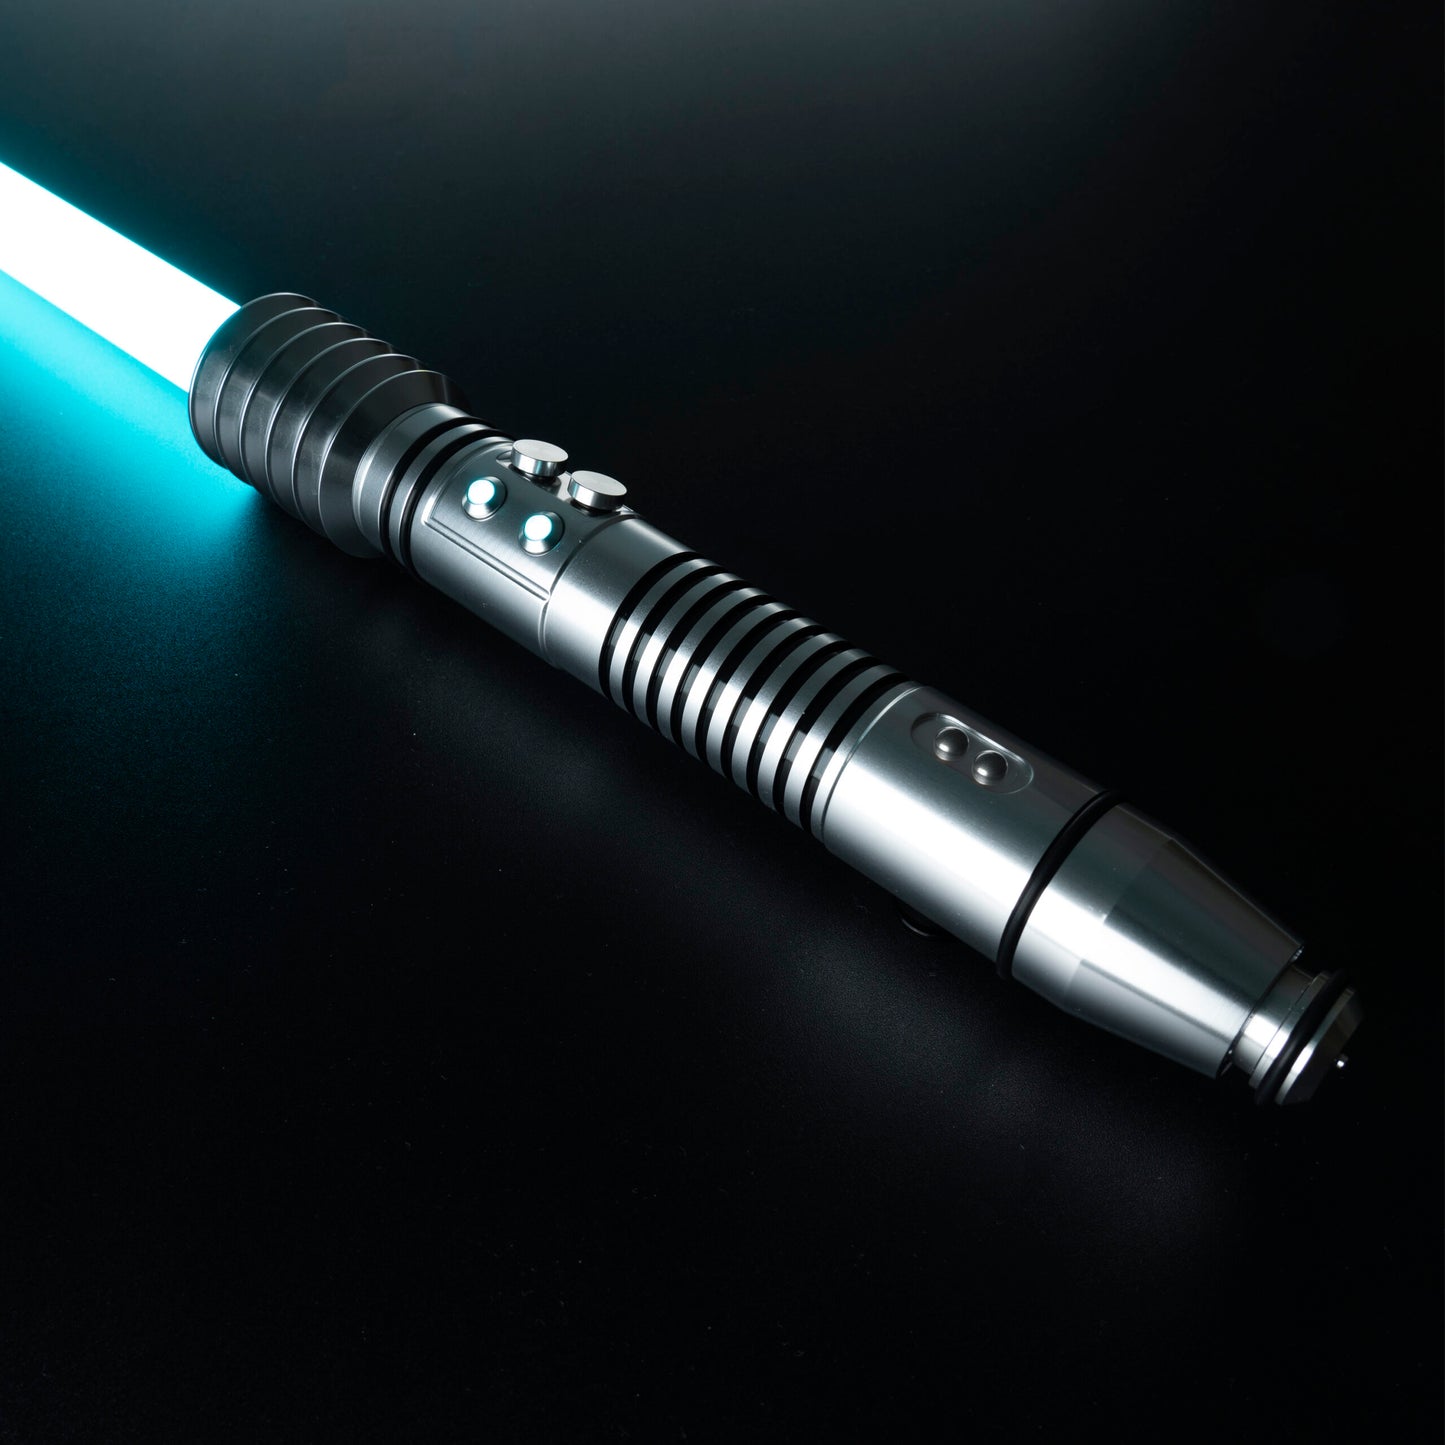 THE FURIOUS FISTO LIGHTSABER